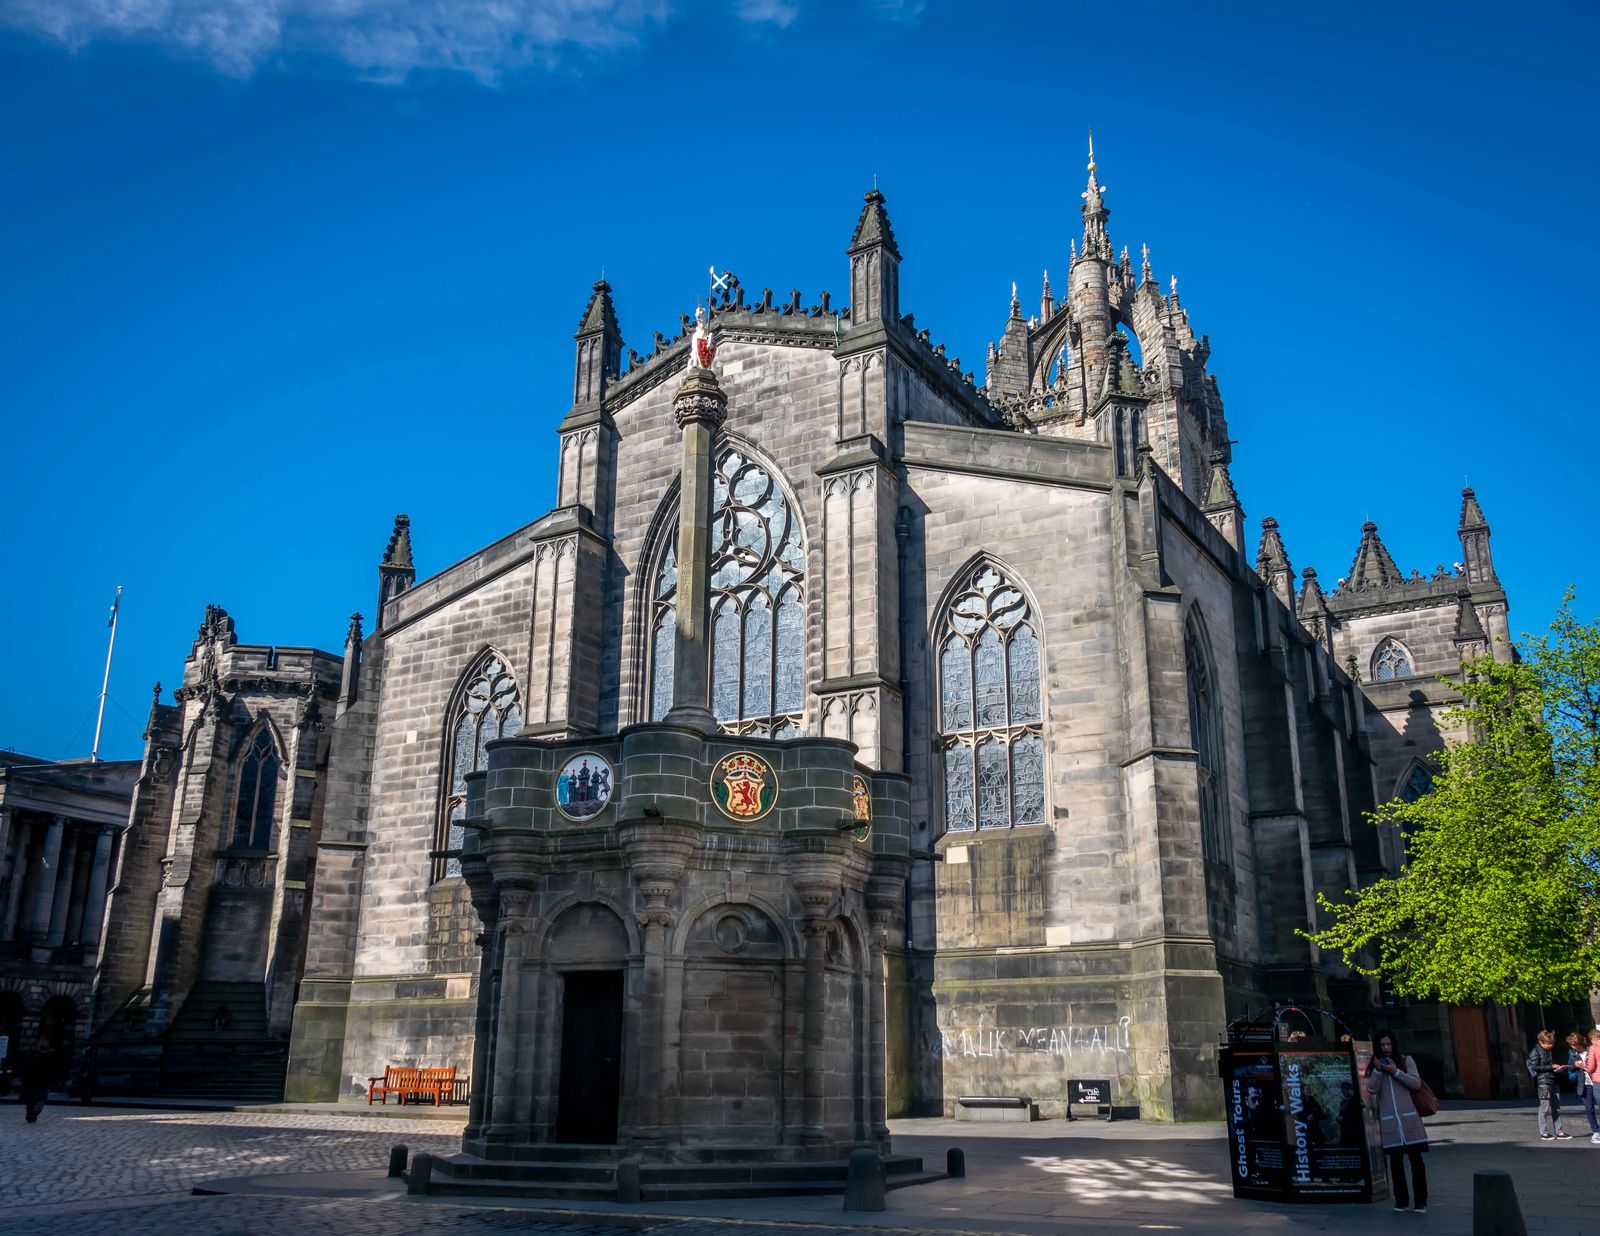 What to see on the royal mile in edinburgh